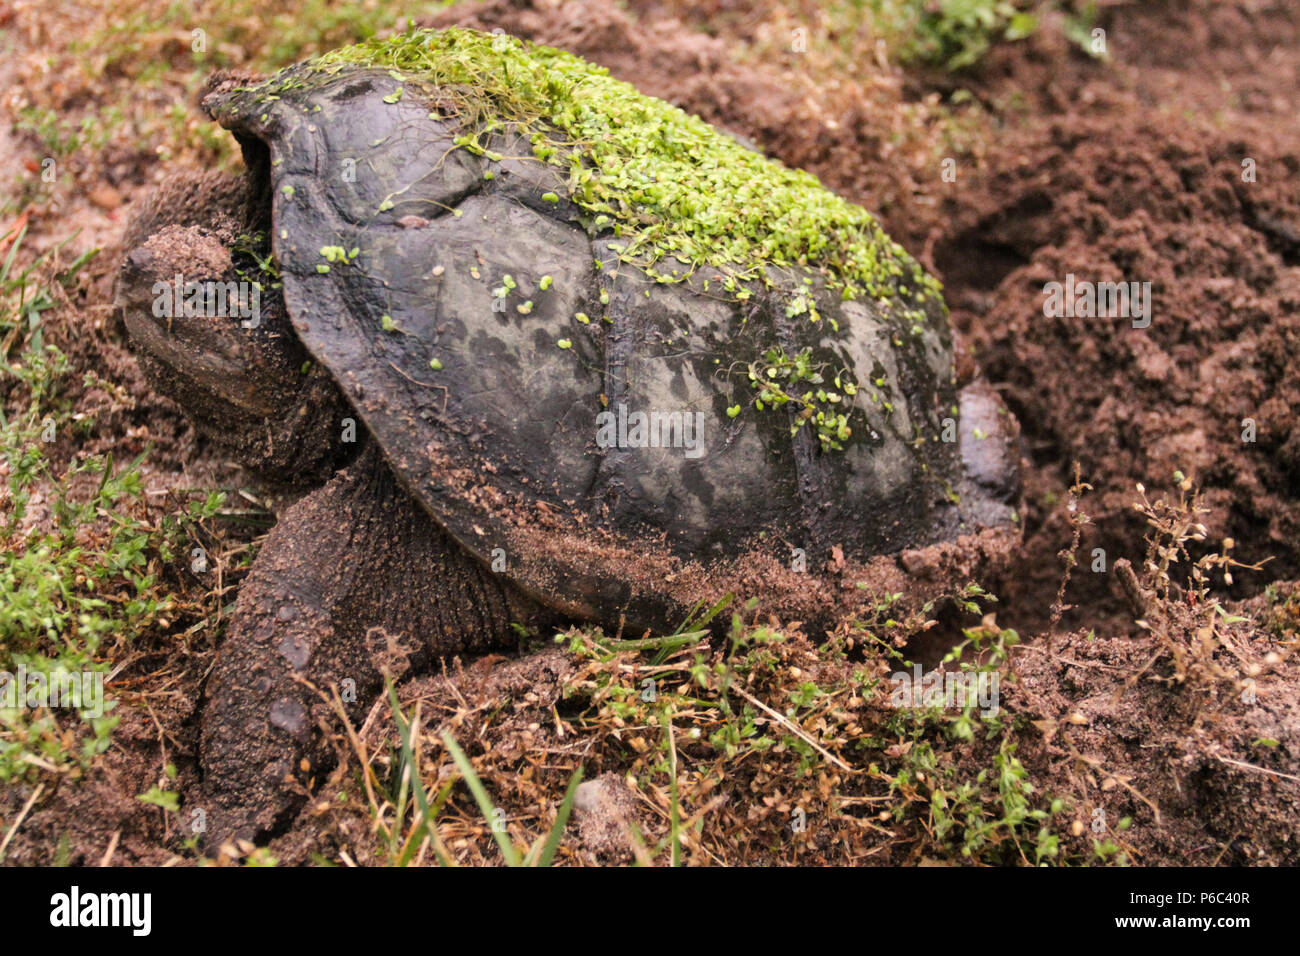 Female Snapping Turtle Laying Eggs Stock Photo